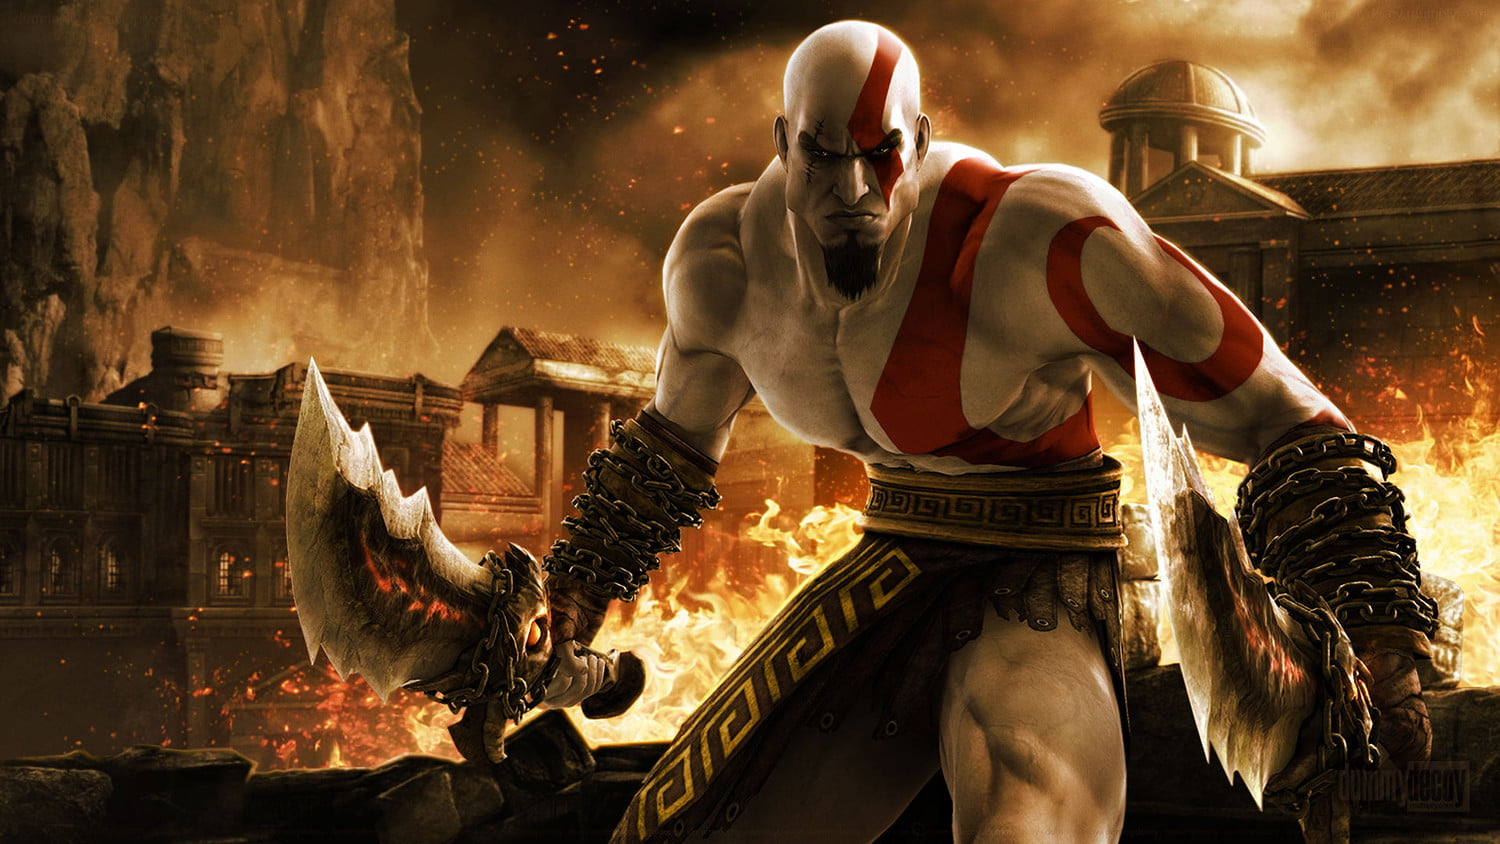 Cancelled Canon: San Andreas Hot coffee  - god of war images download - Dan989, Cguy Siddel